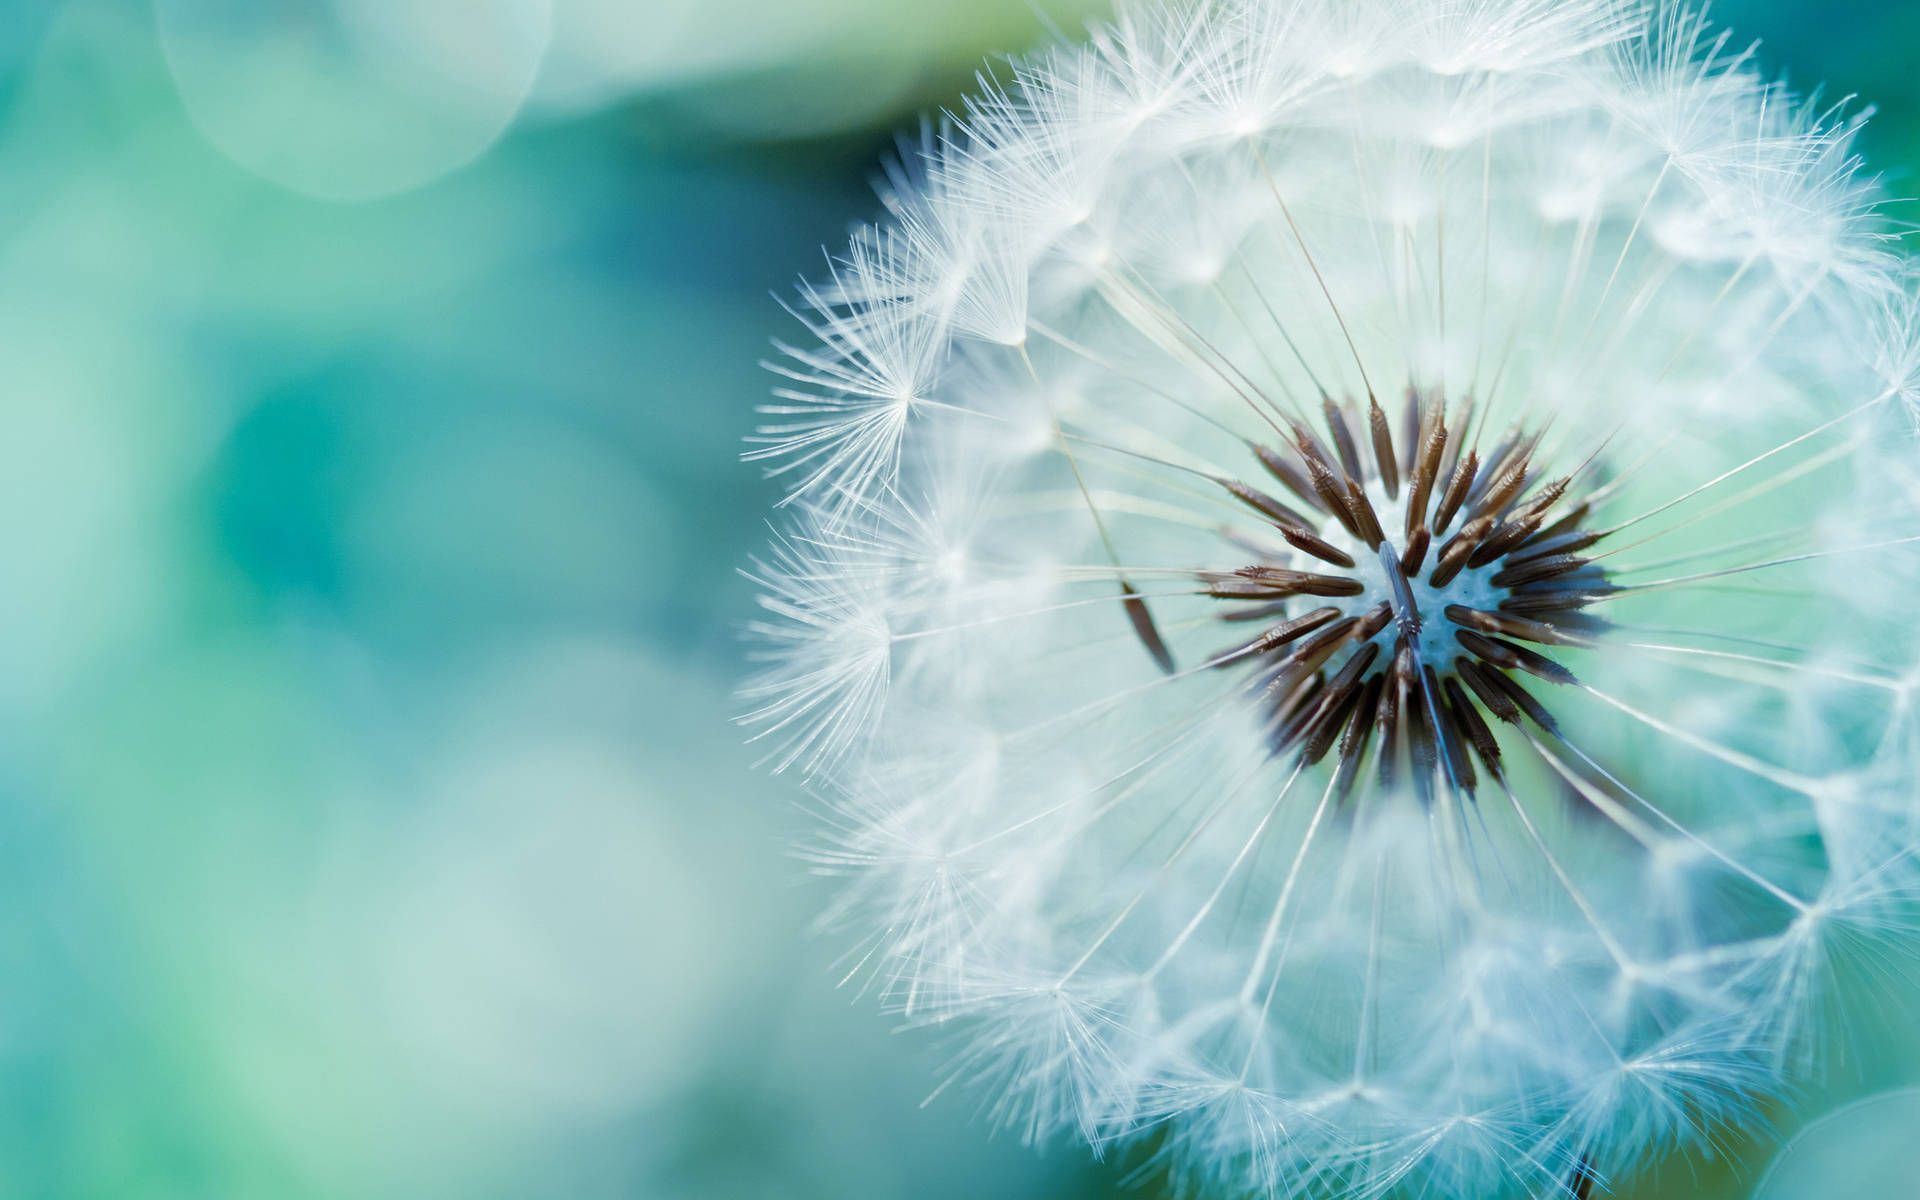 A close up of a dandelion with a blue and green background - Dandelions